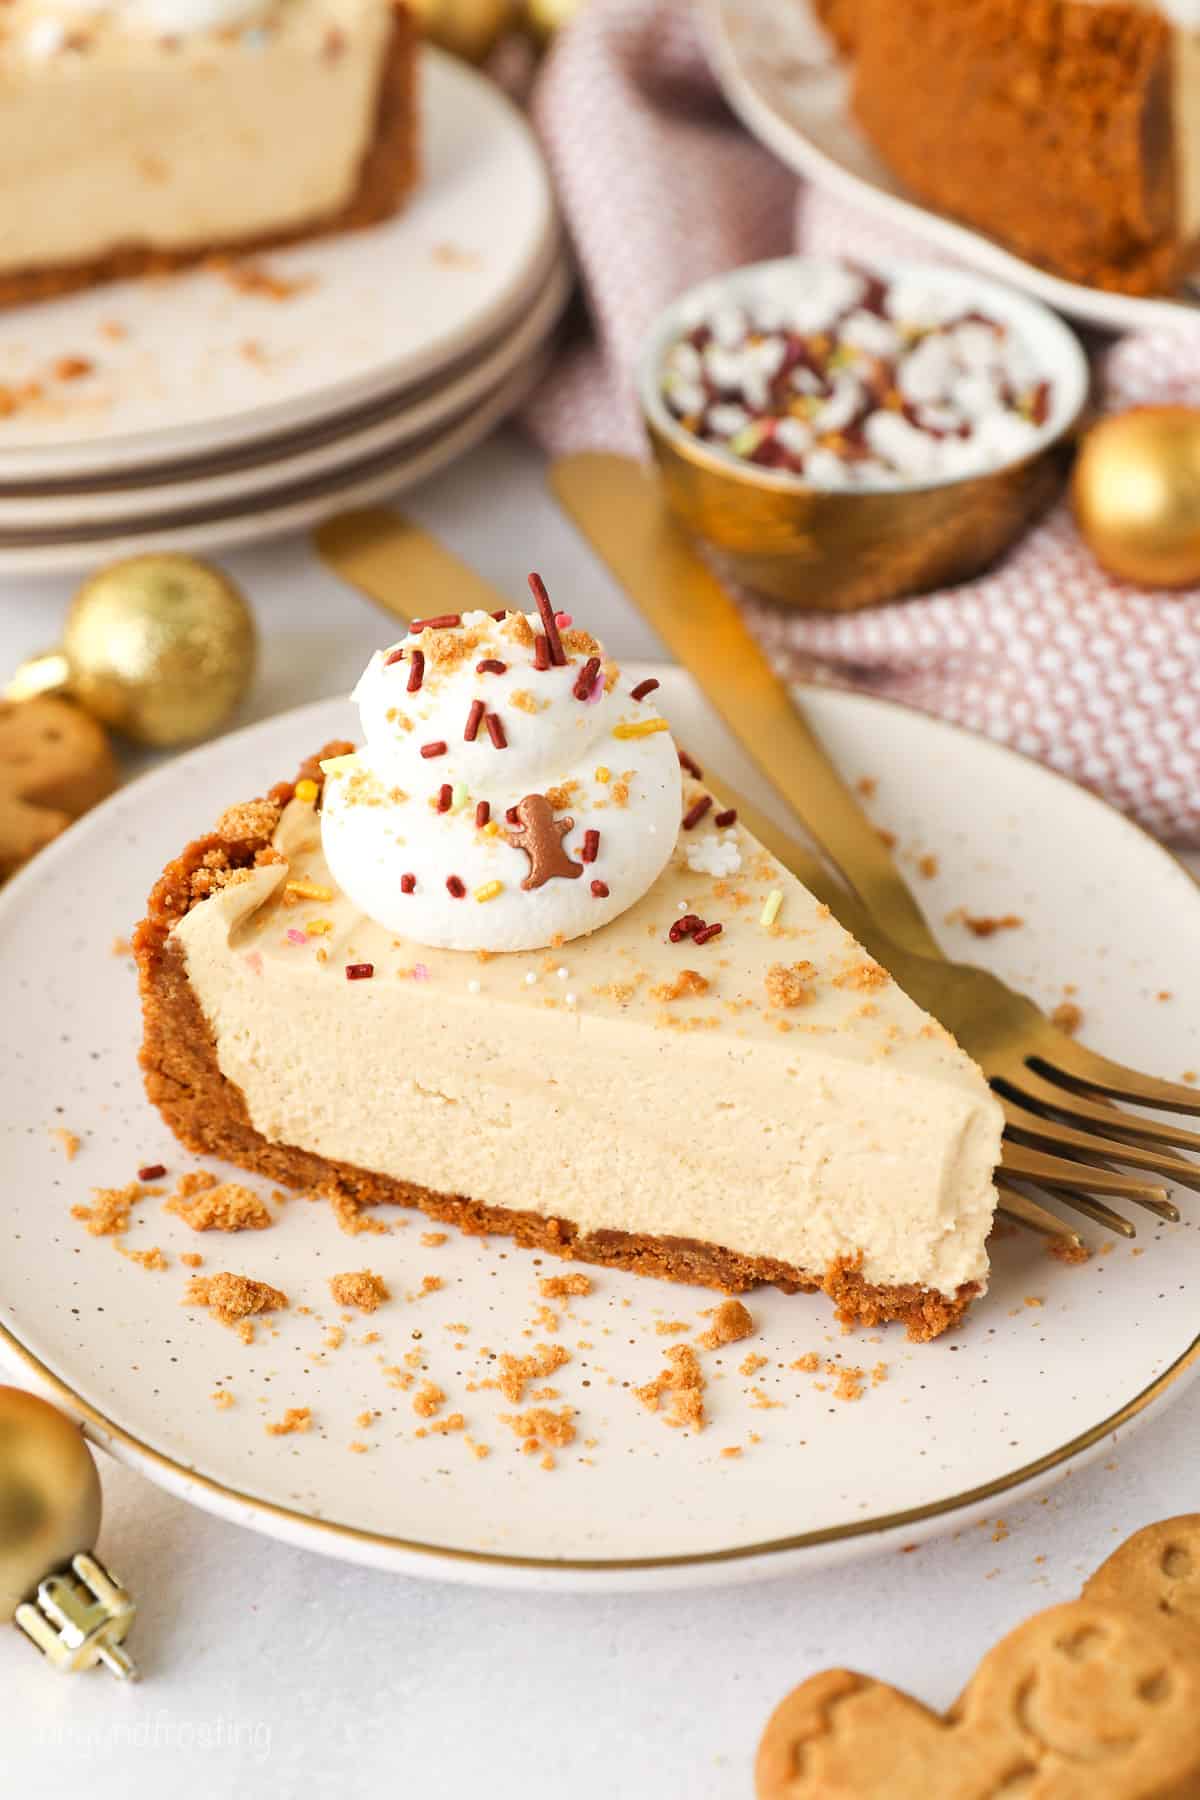 https://beyondfrosting.com/wp-content/uploads/2014/12/No-Bake-Gingerbread-Cheesecake-3707.jpg